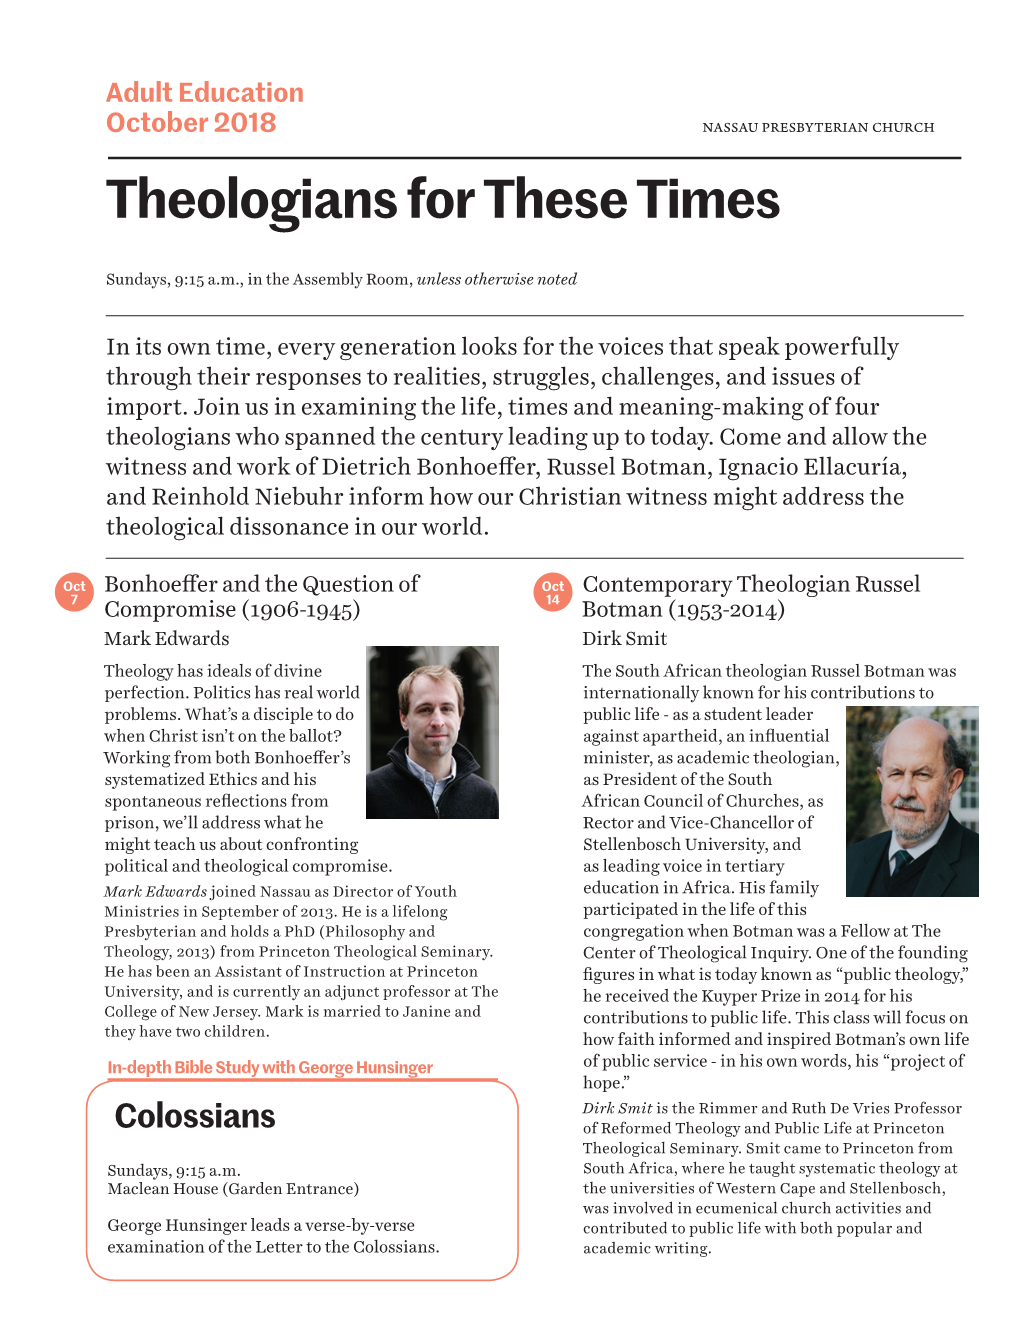 Theologians for These Times